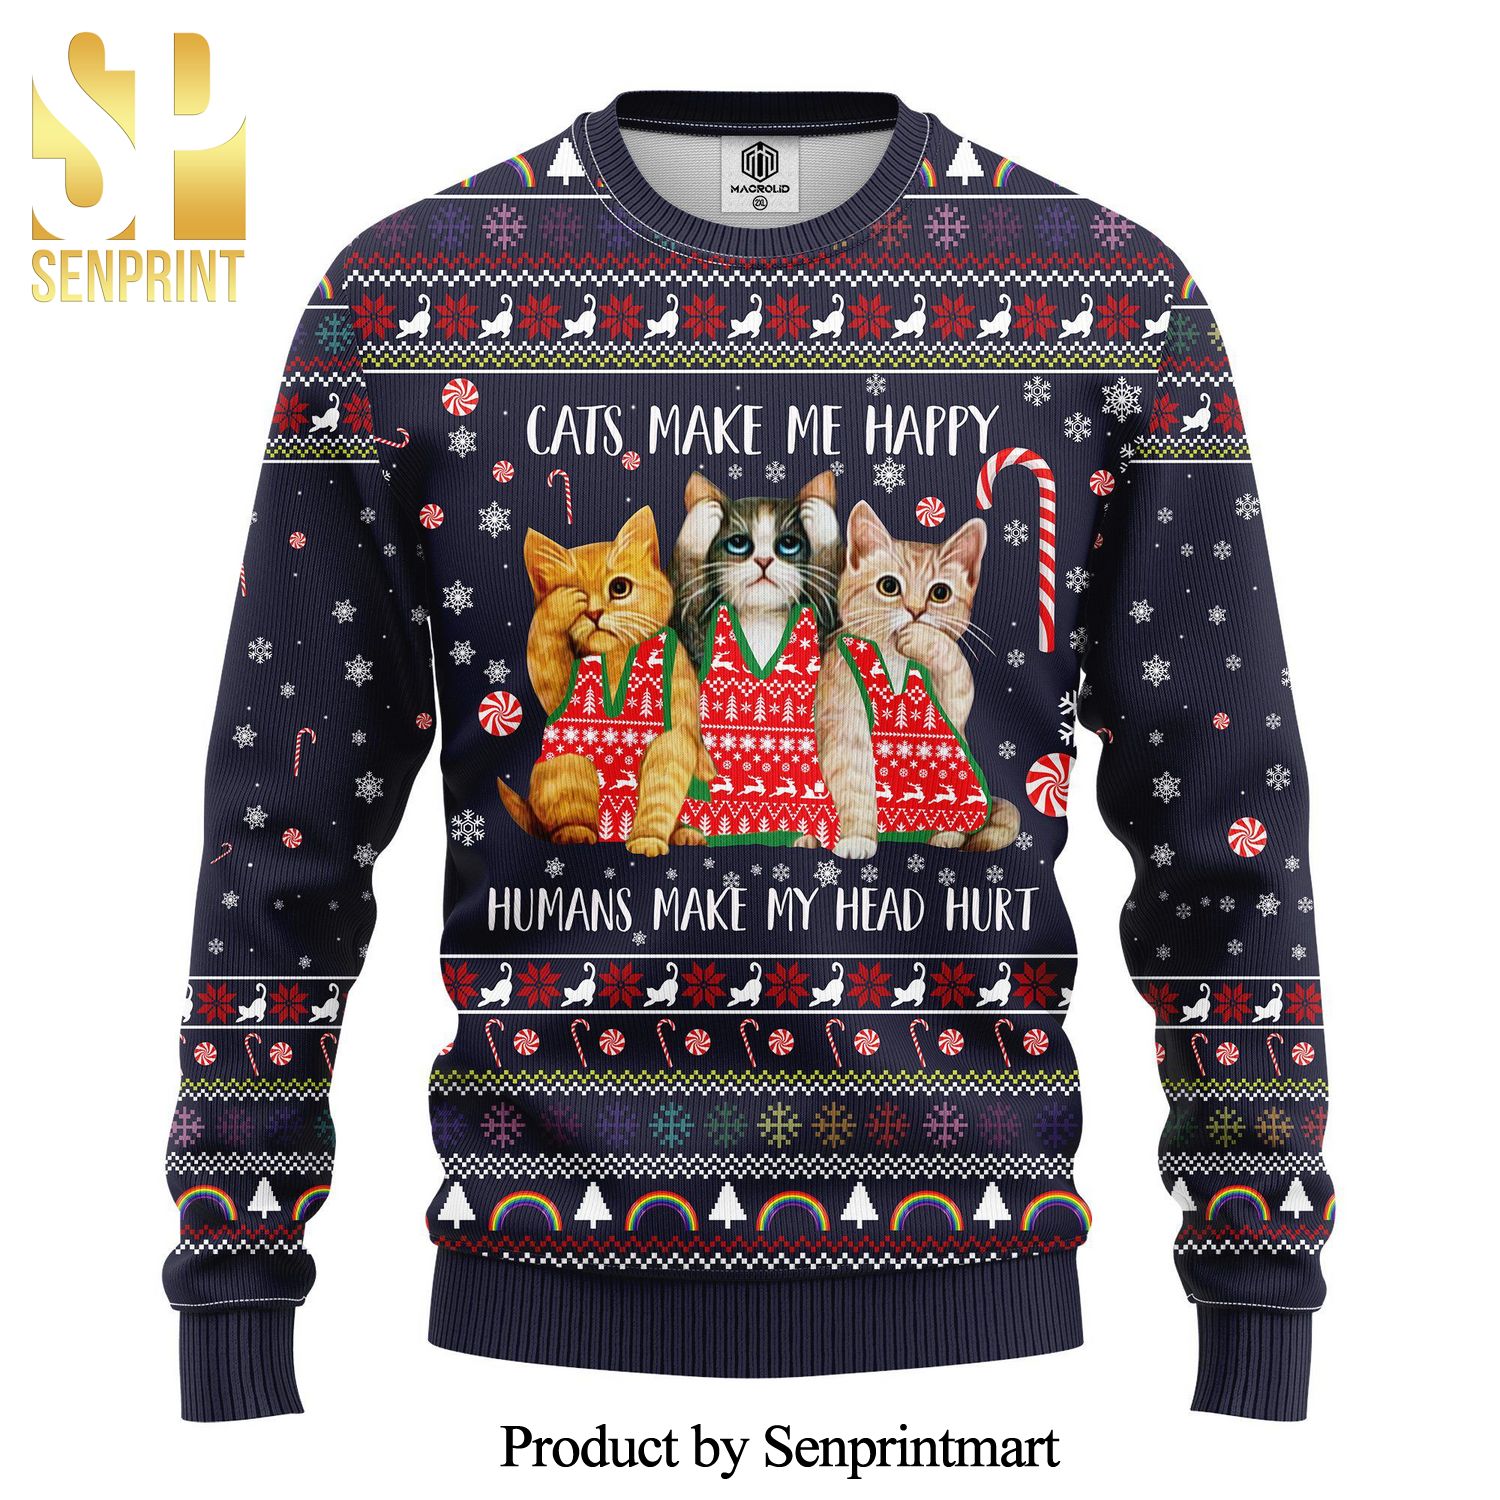 Cat Make Me Happy Human Makes My Head Hurt Knitted Ugly Christmas Sweater